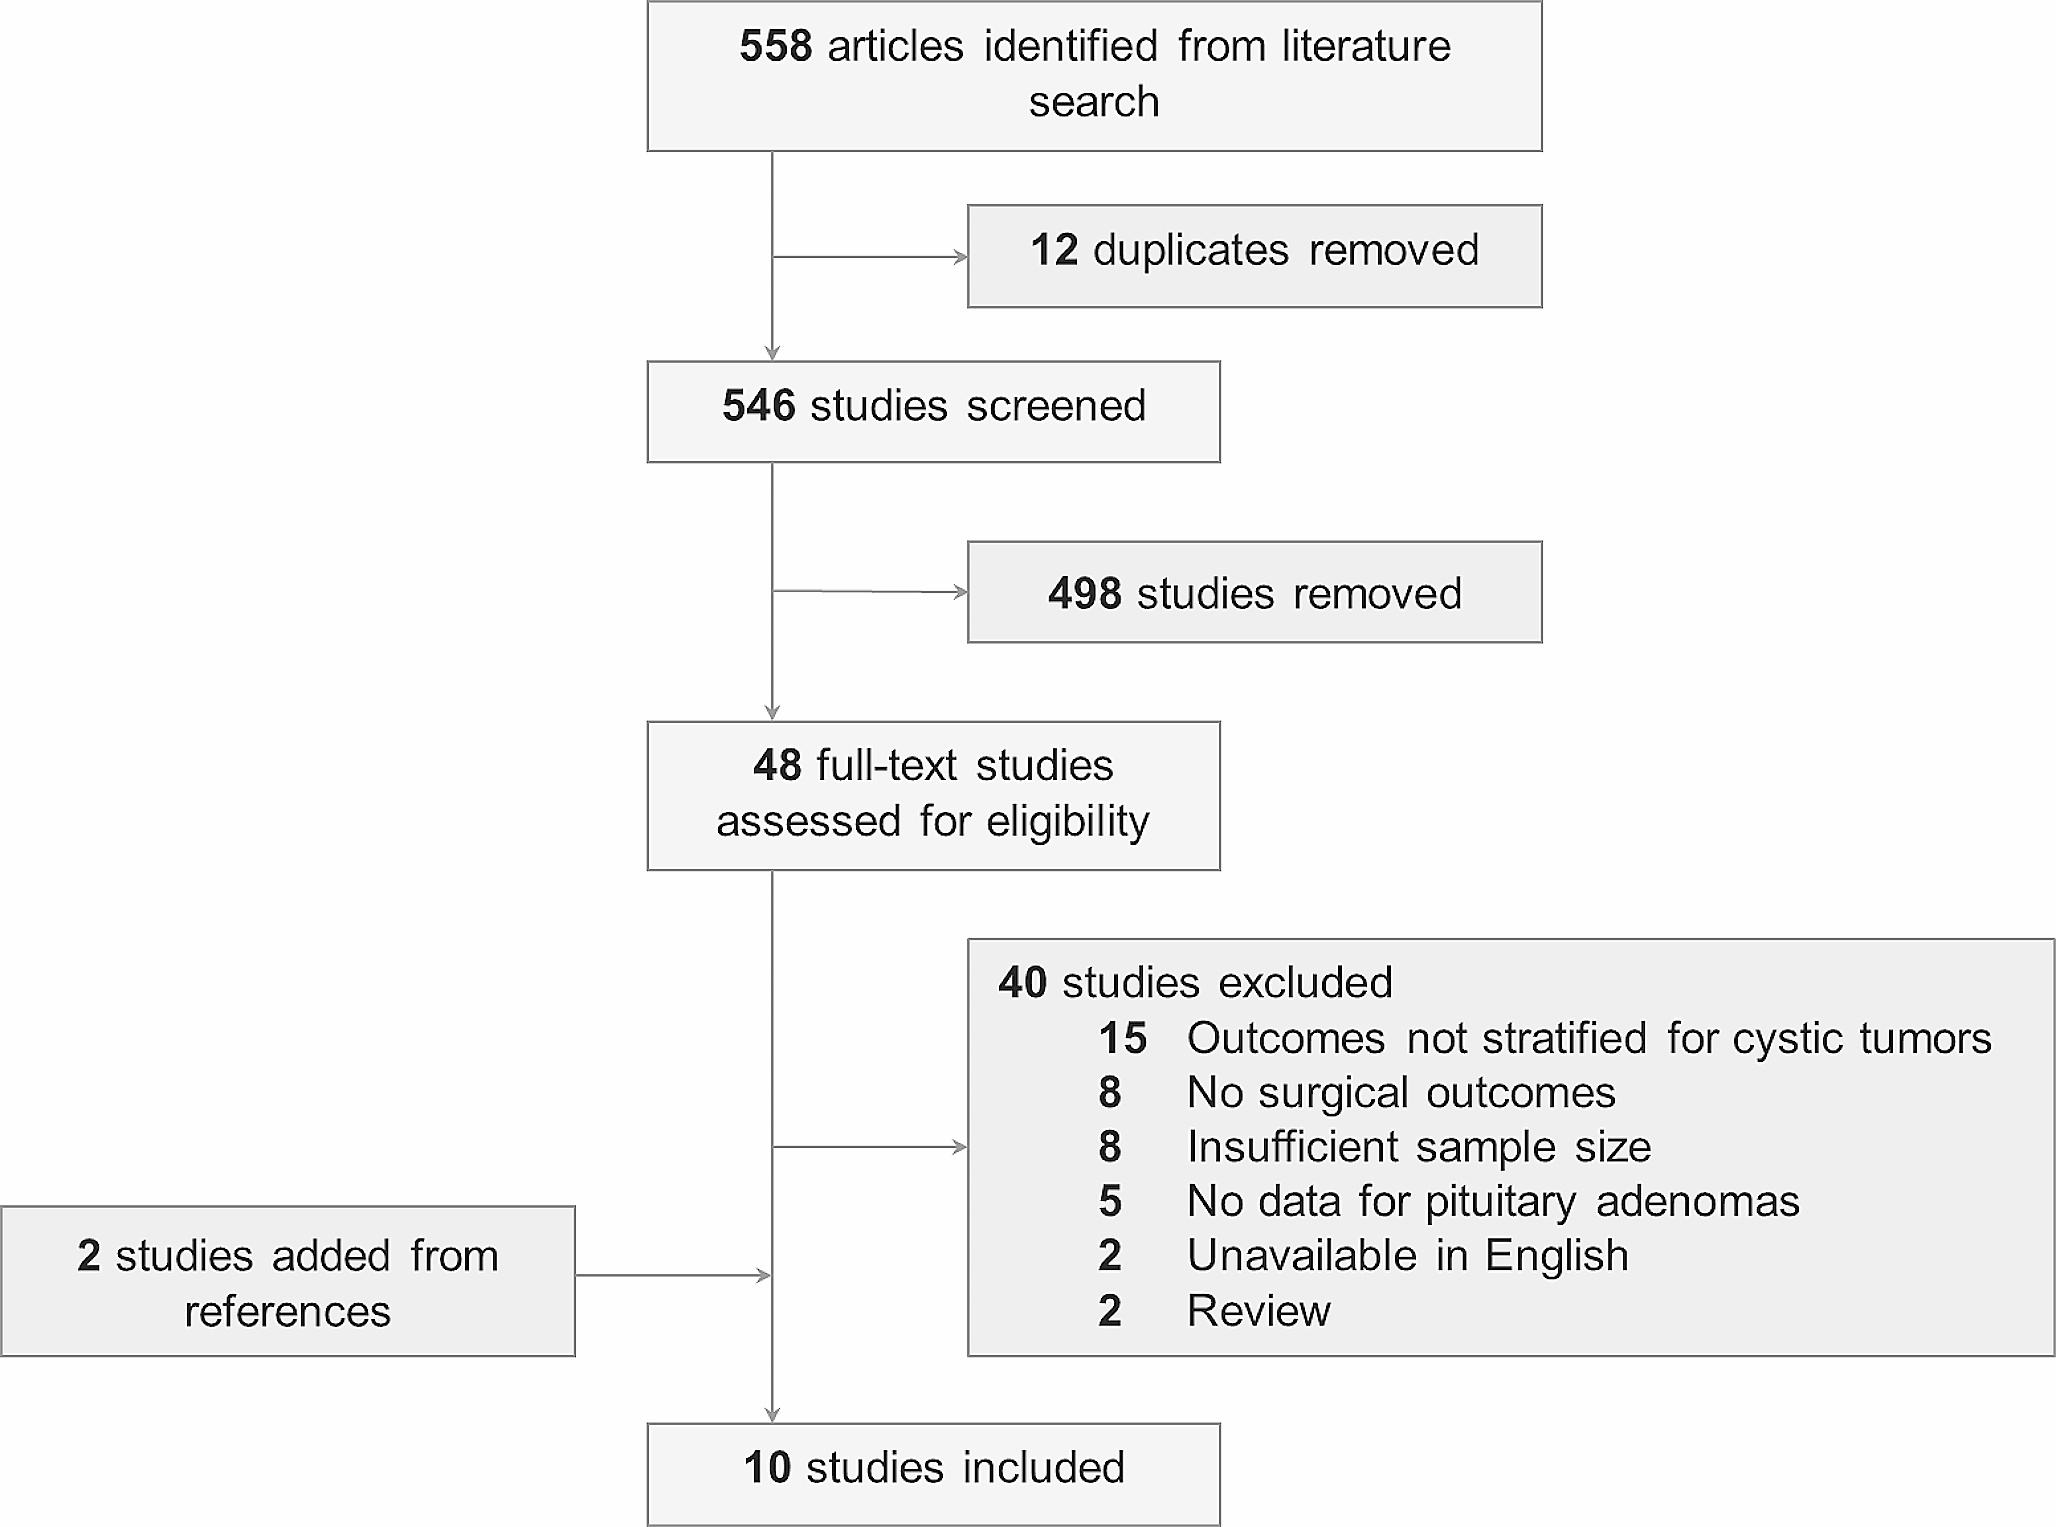 Surgical treatment of cystic pituitary adenomas: literature-based definitions and postoperative outcomes